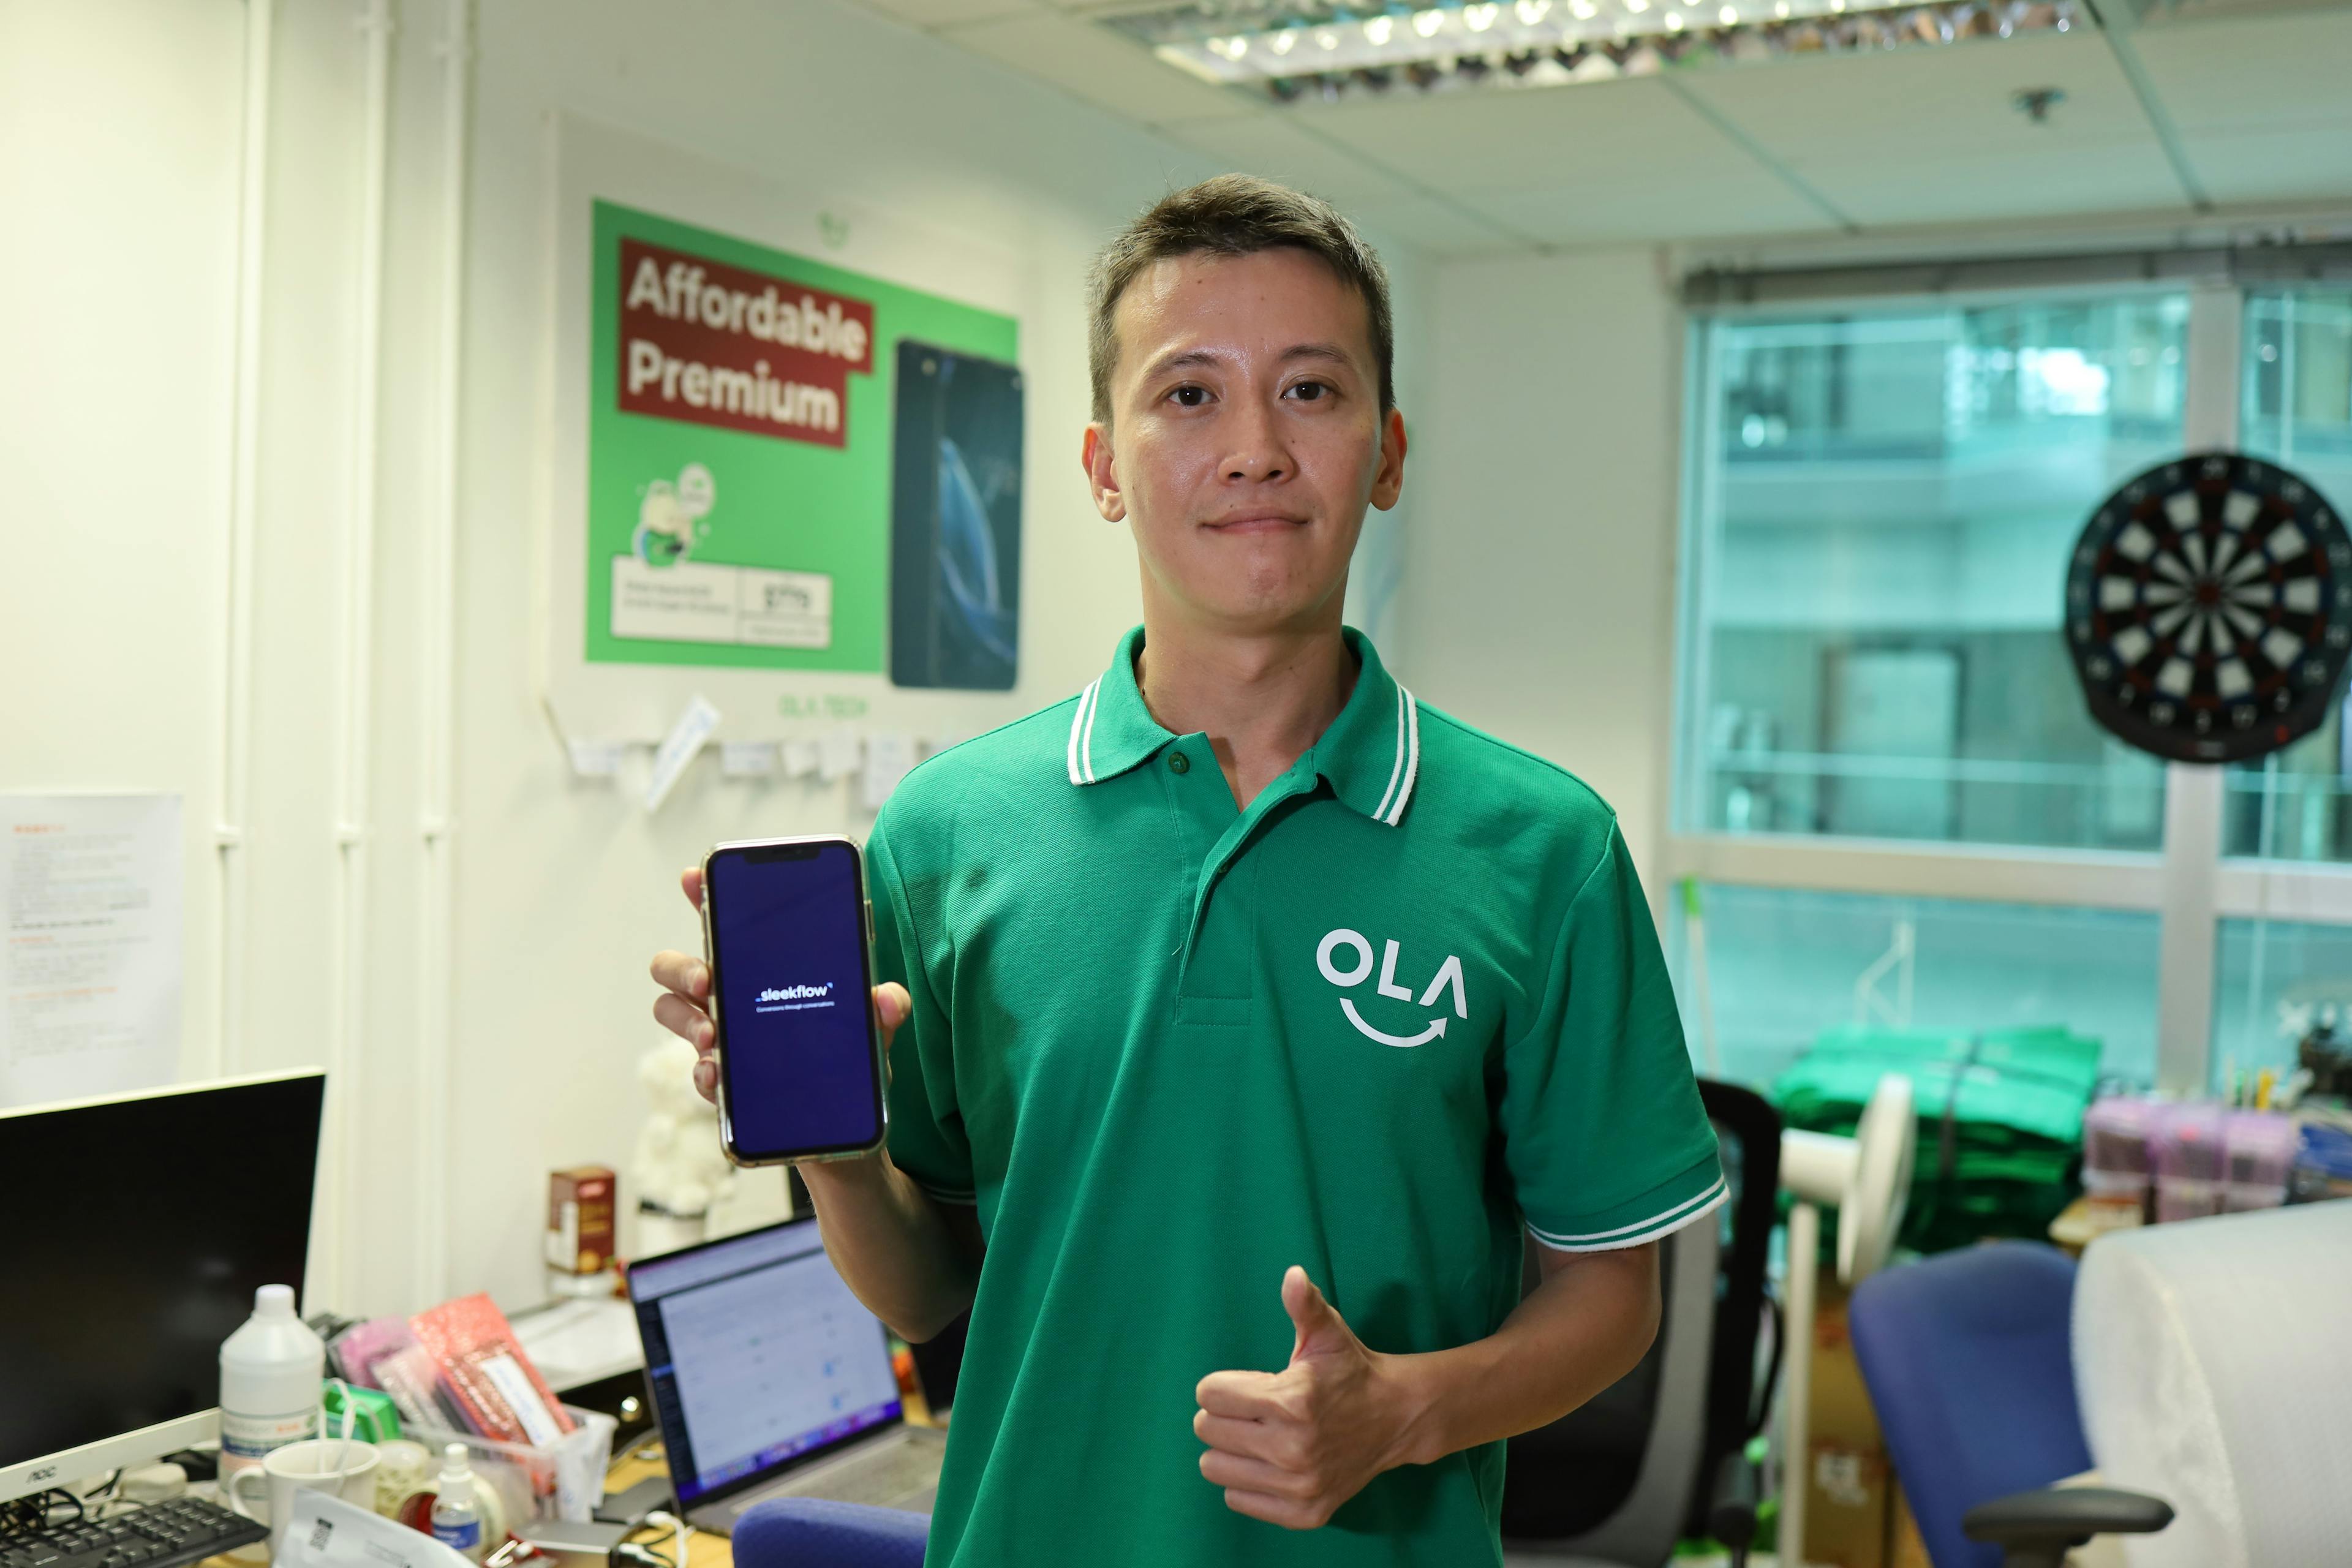 How Ola Tech, a refurbished electronics marketplace, uses SleekFlow to boost sales by 20%